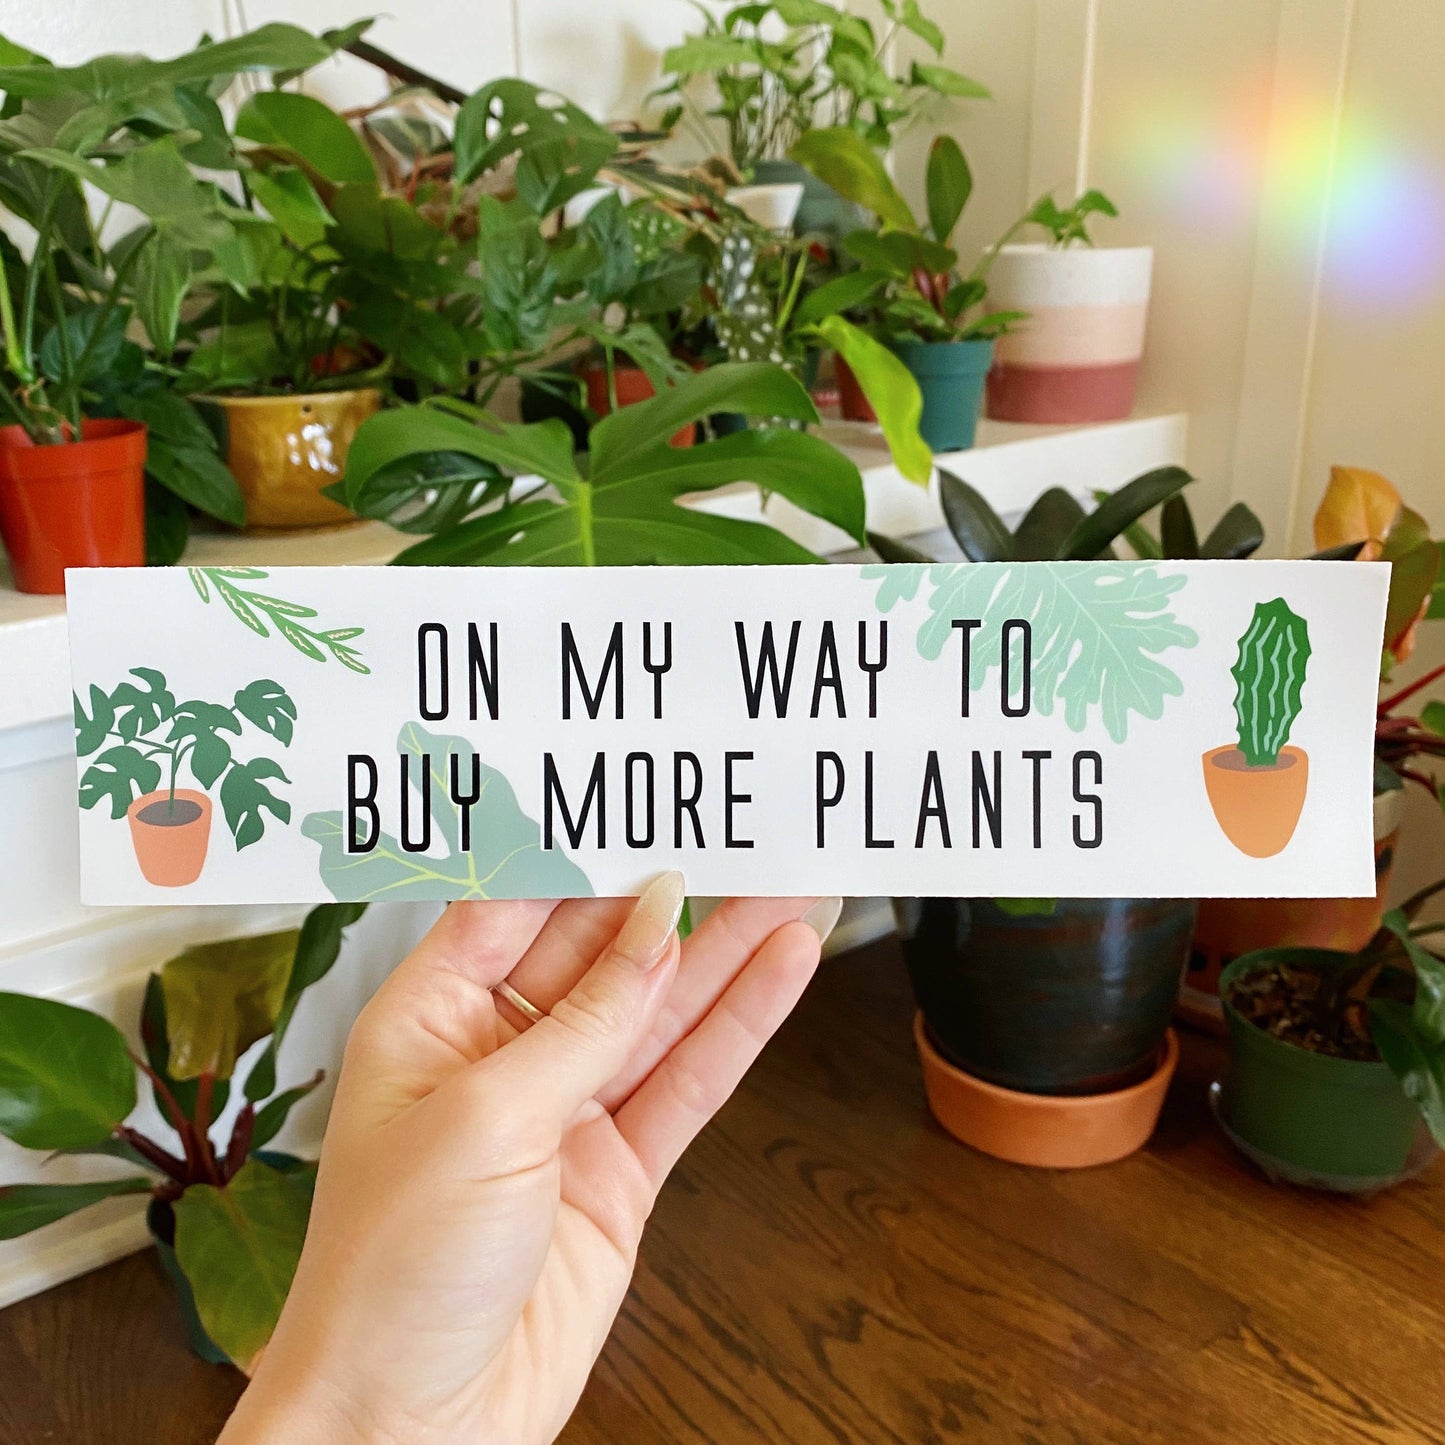 Bumper Sticker “ON MY WAY TO BUY MORE PLANTS”